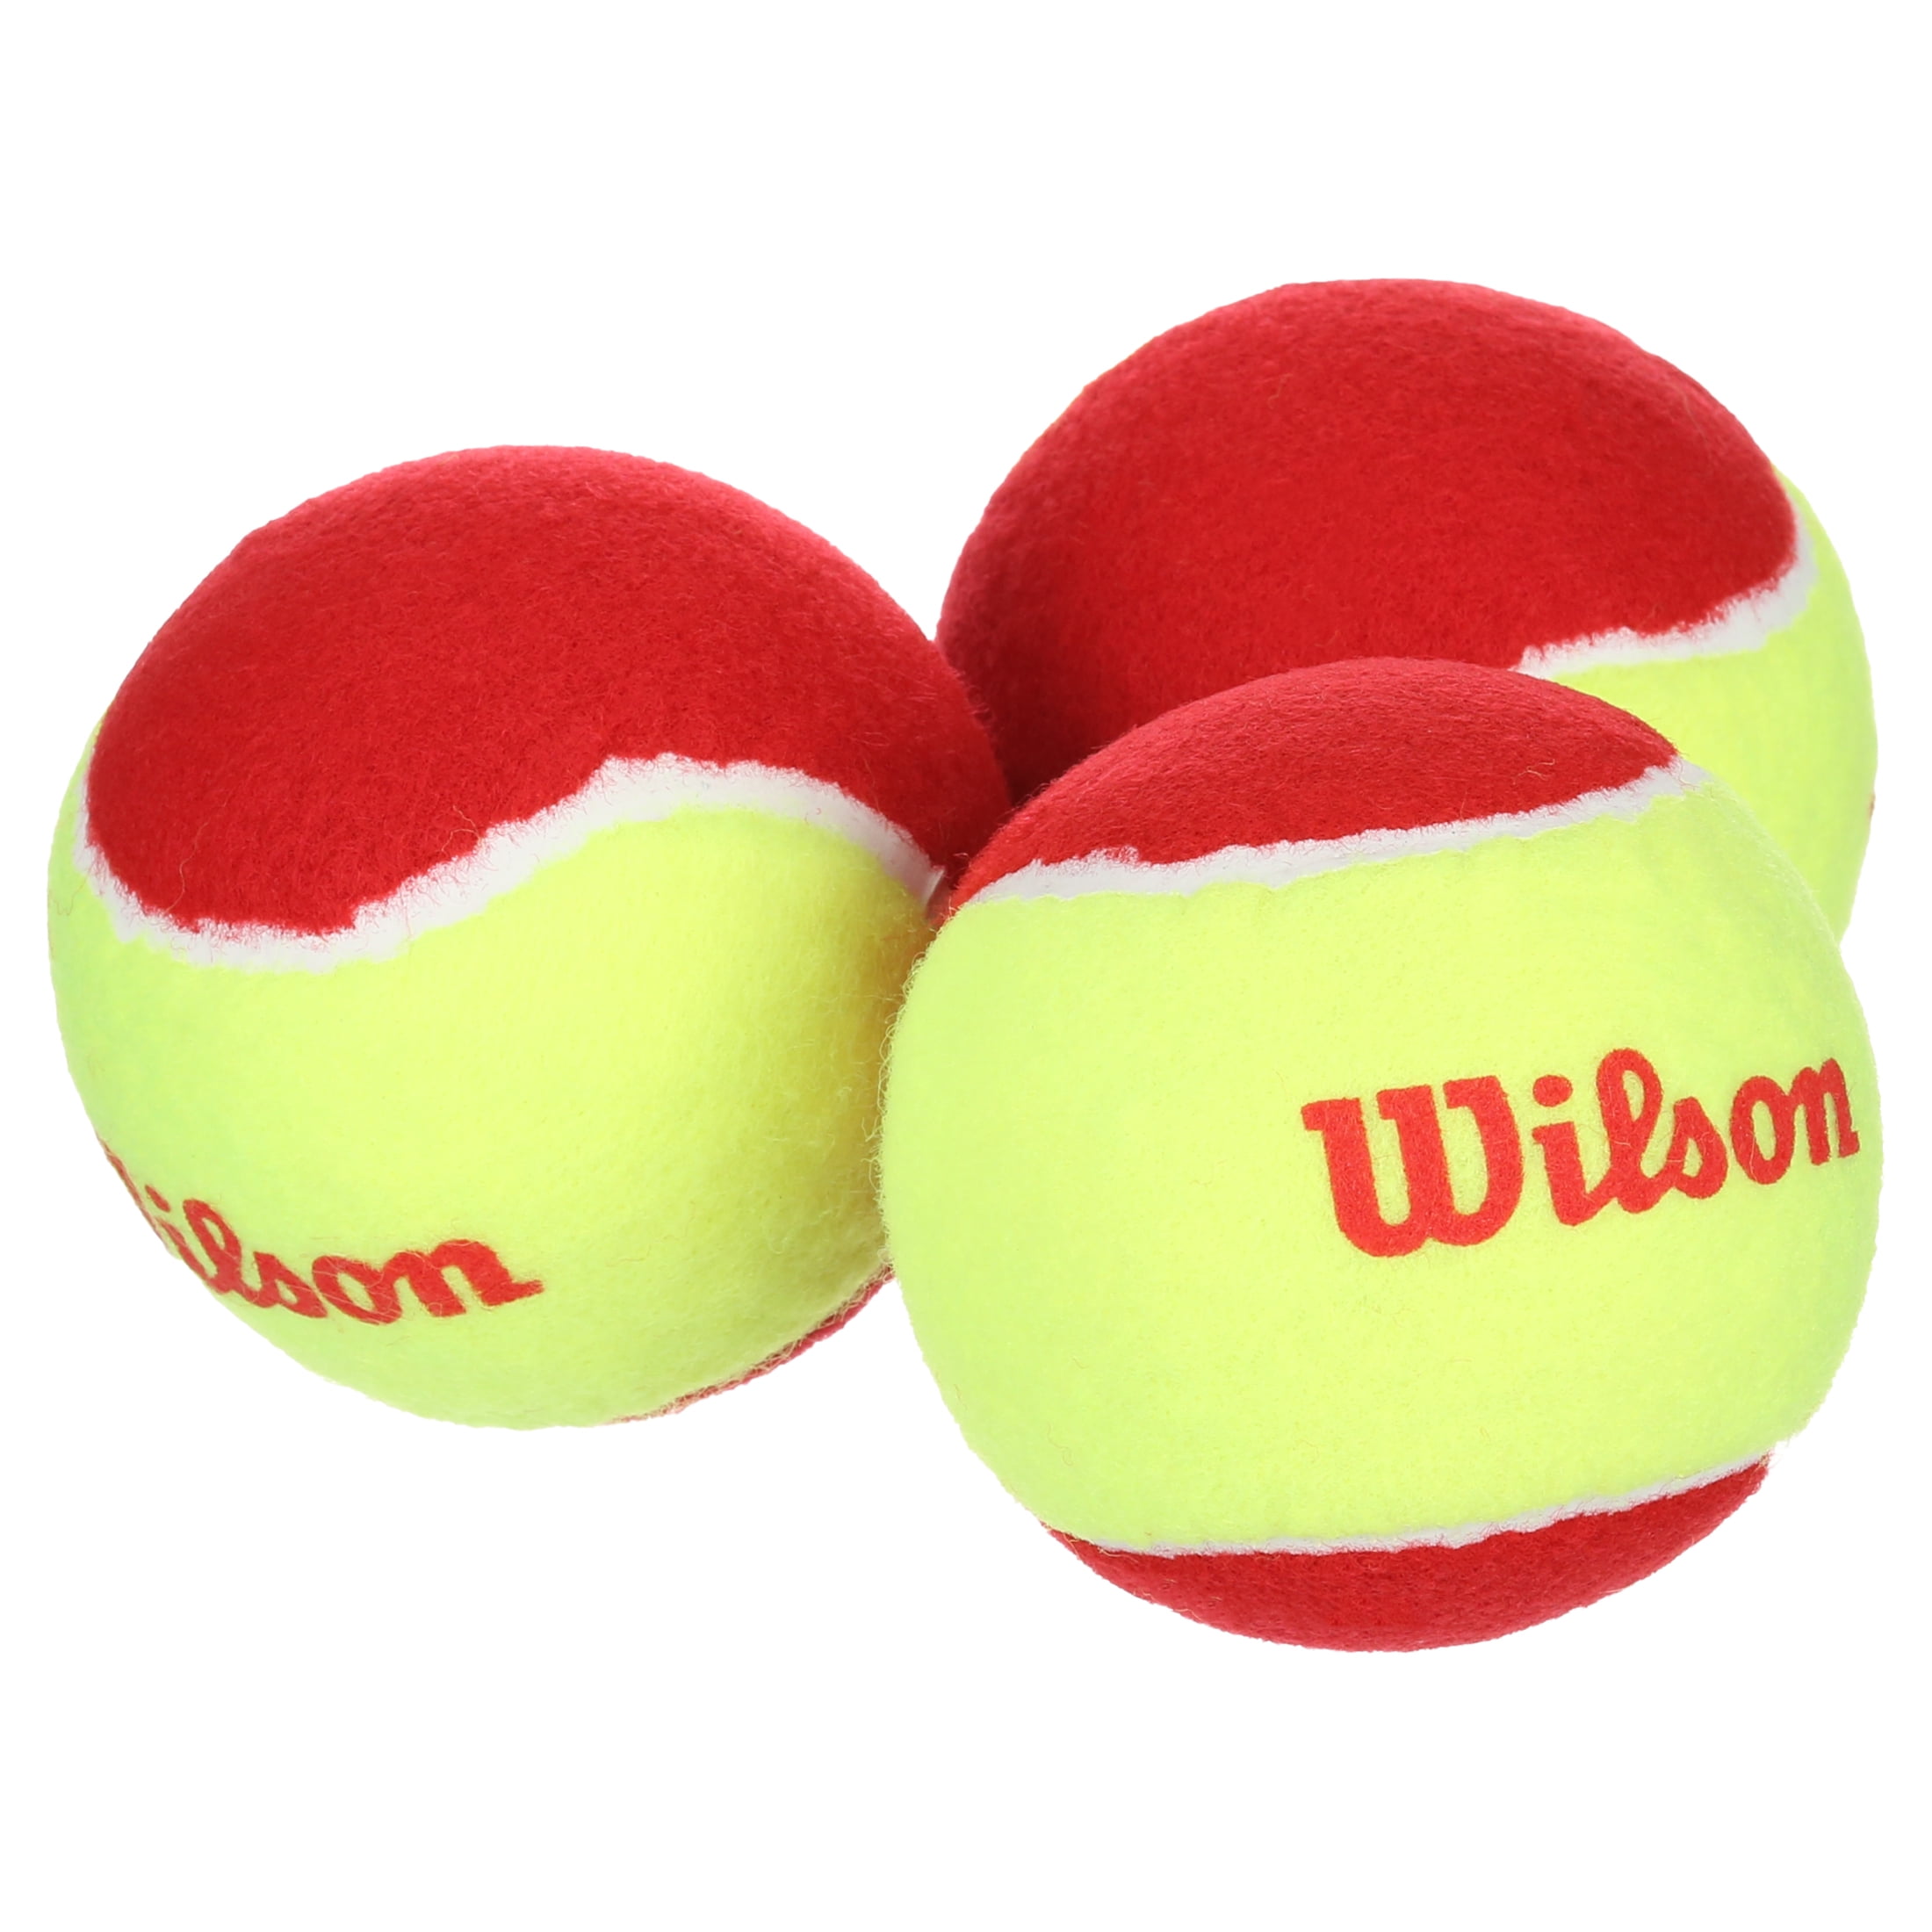 Outdoor Fun Sports Competitive Coloured Tennis Ball Pack Of 12-3 Each Colour 